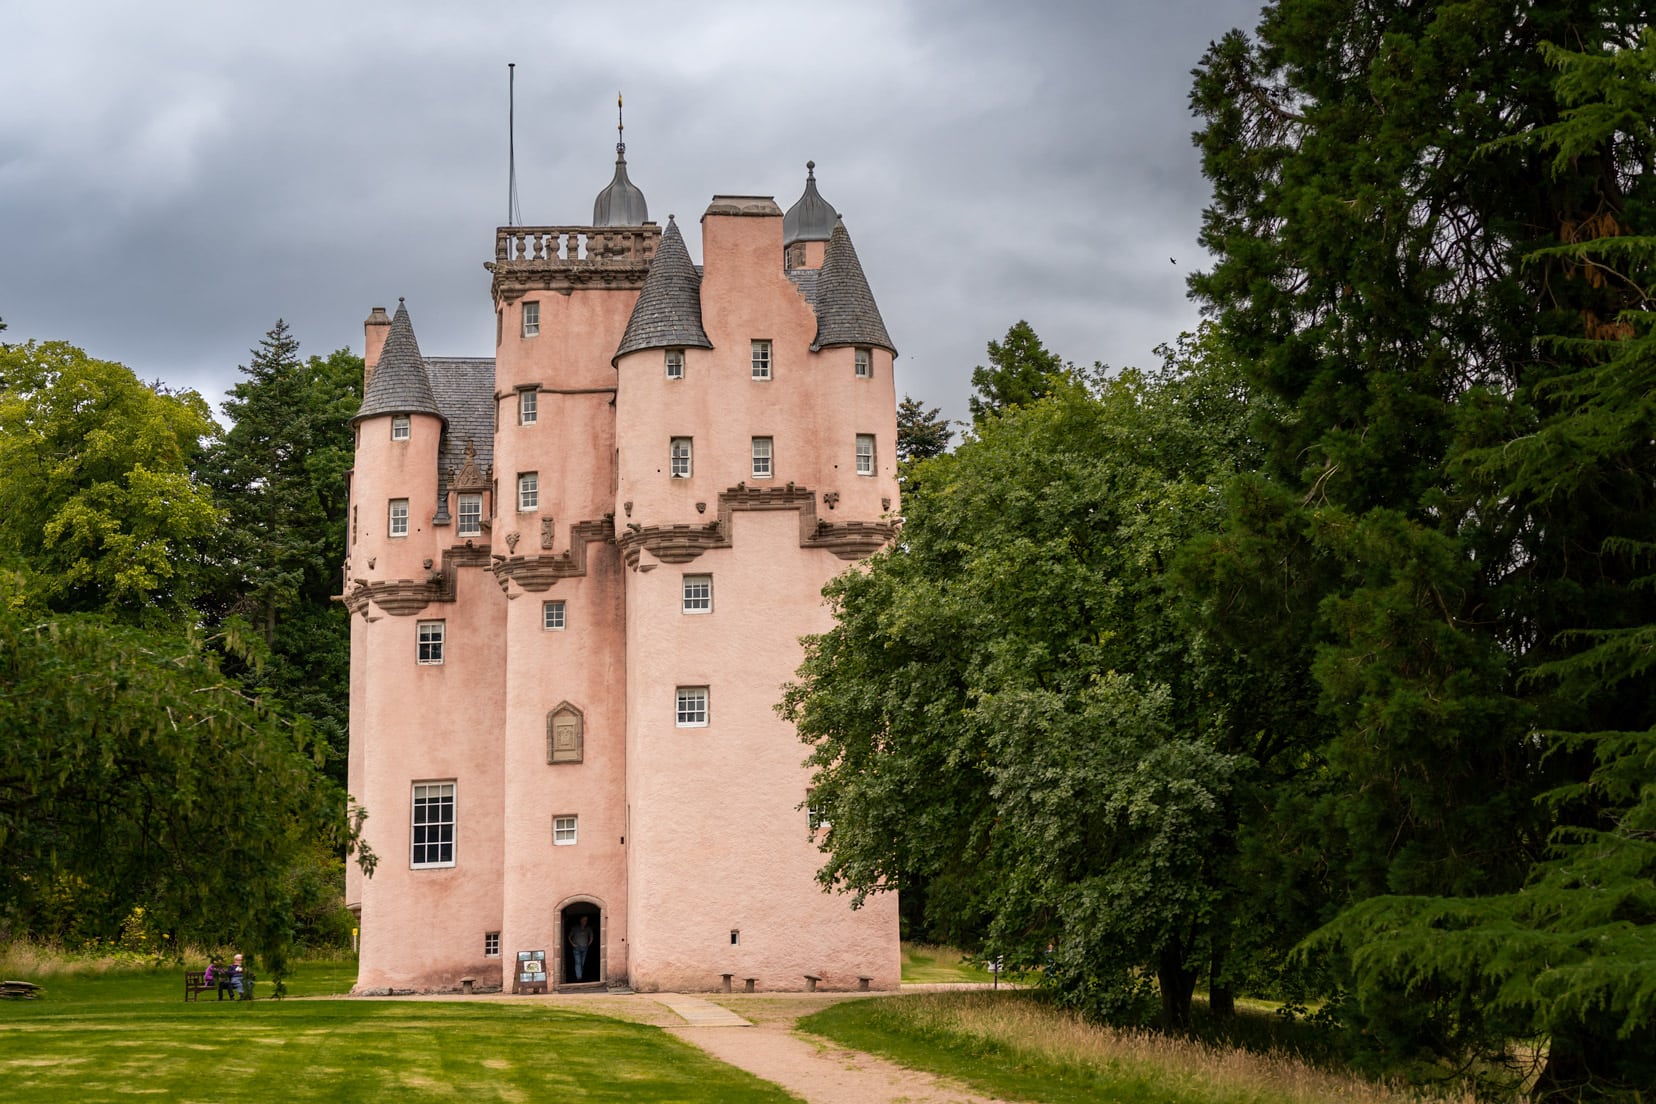 Aberdeenshire castle, Craigevar Castle with its many turrets